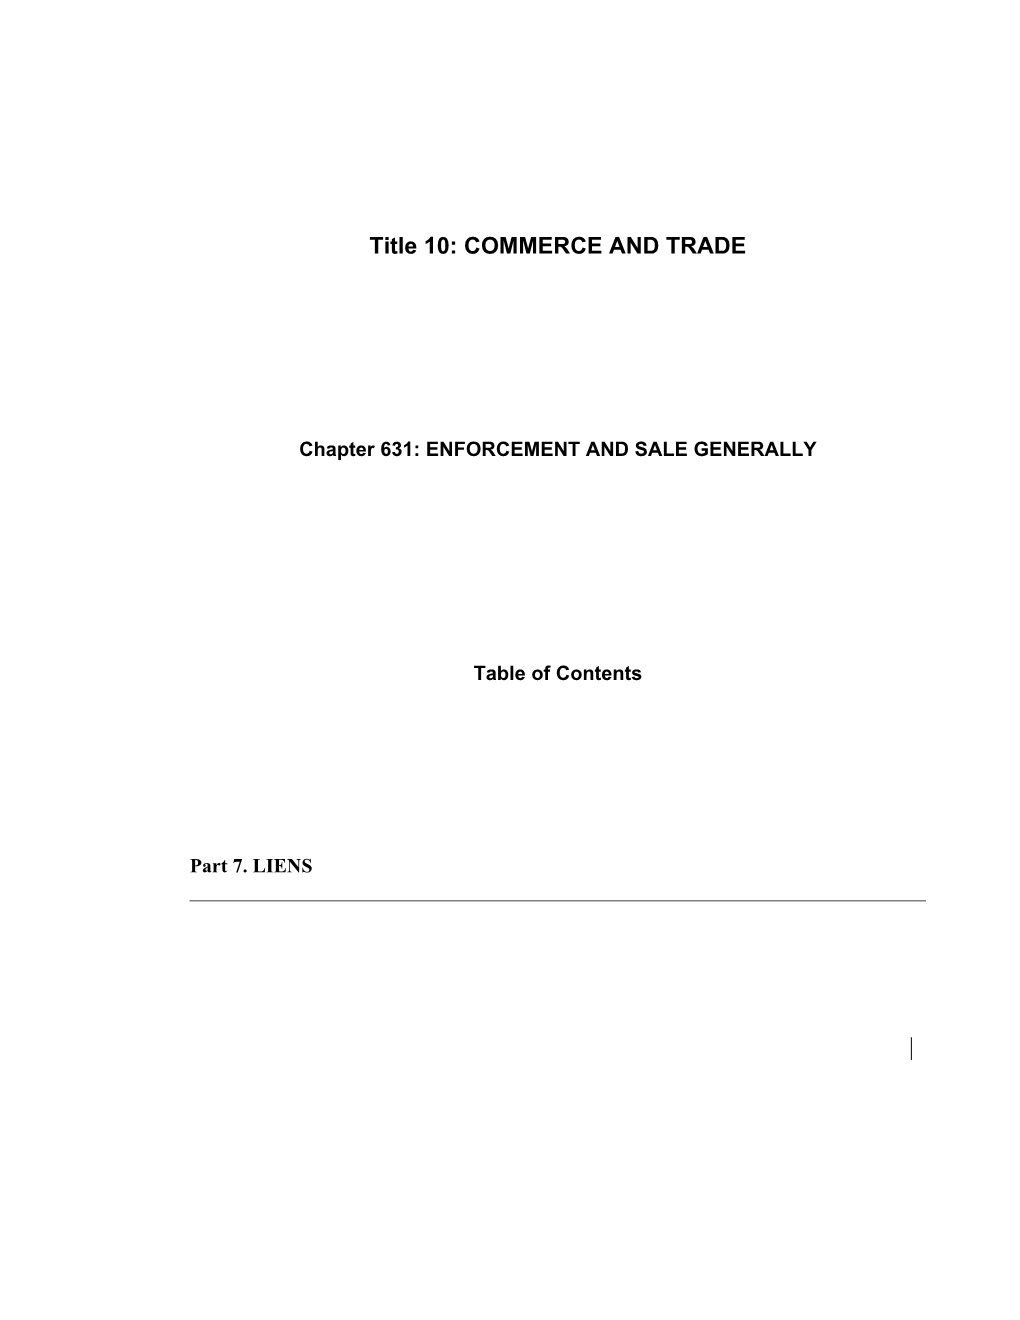 MRS Title 10, Chapter631: ENFORCEMENT and SALE GENERALLY